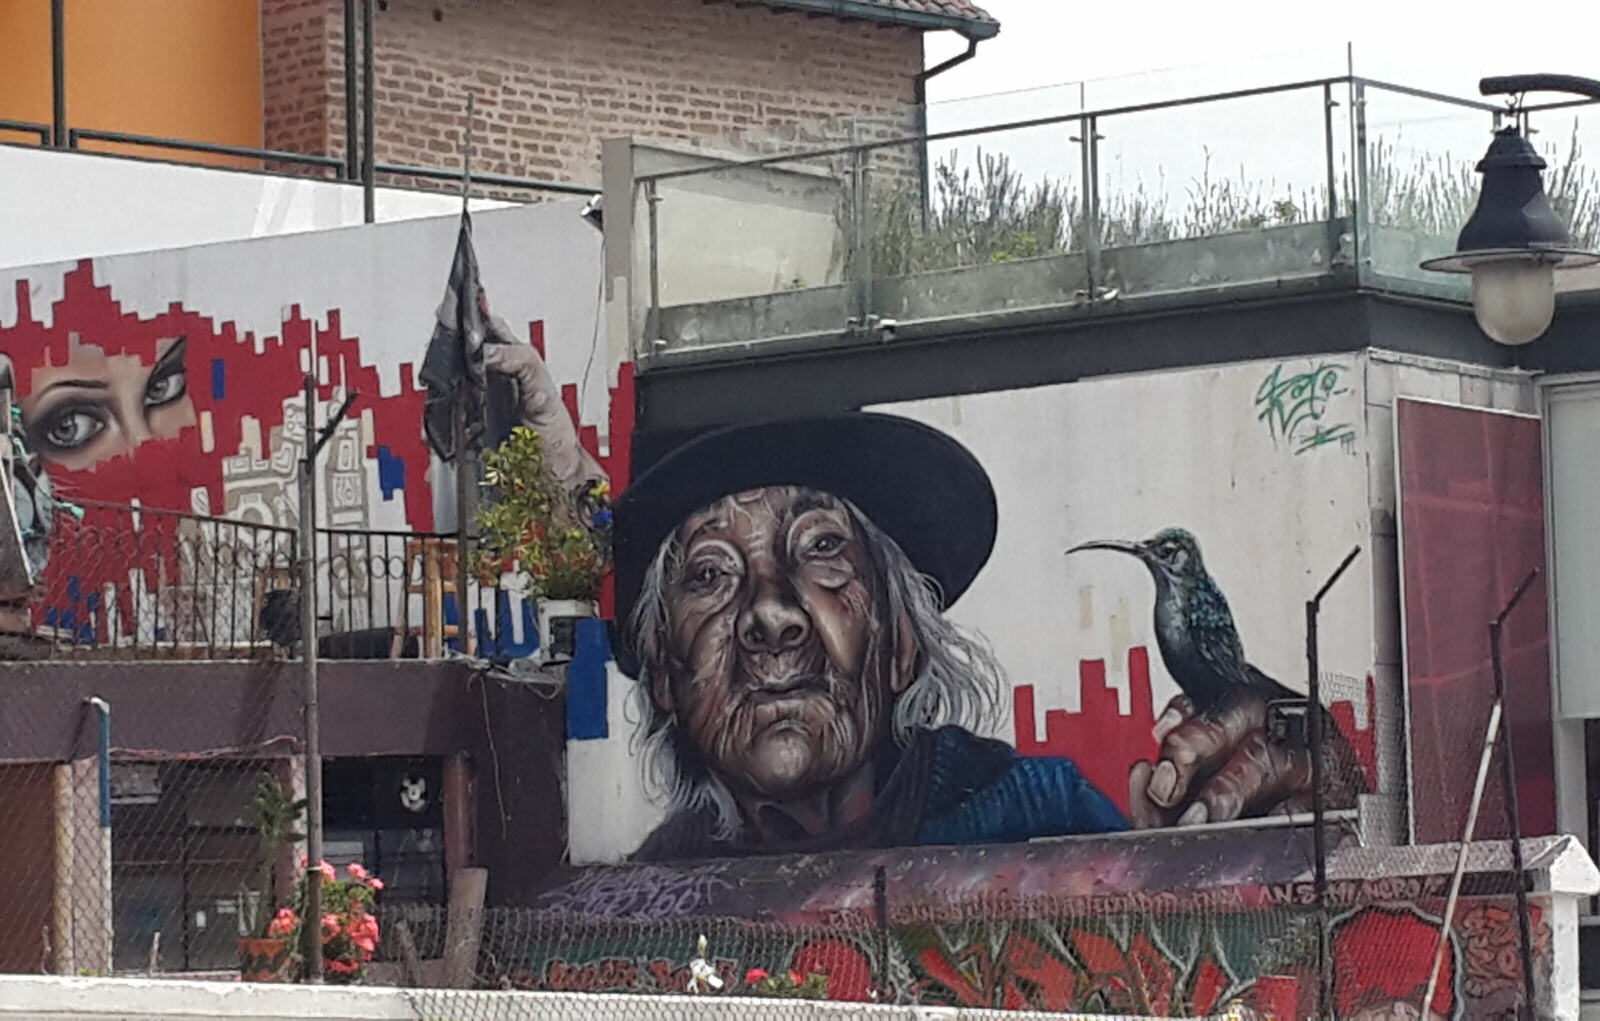 Wall art in the old town, Quito, Ecuador